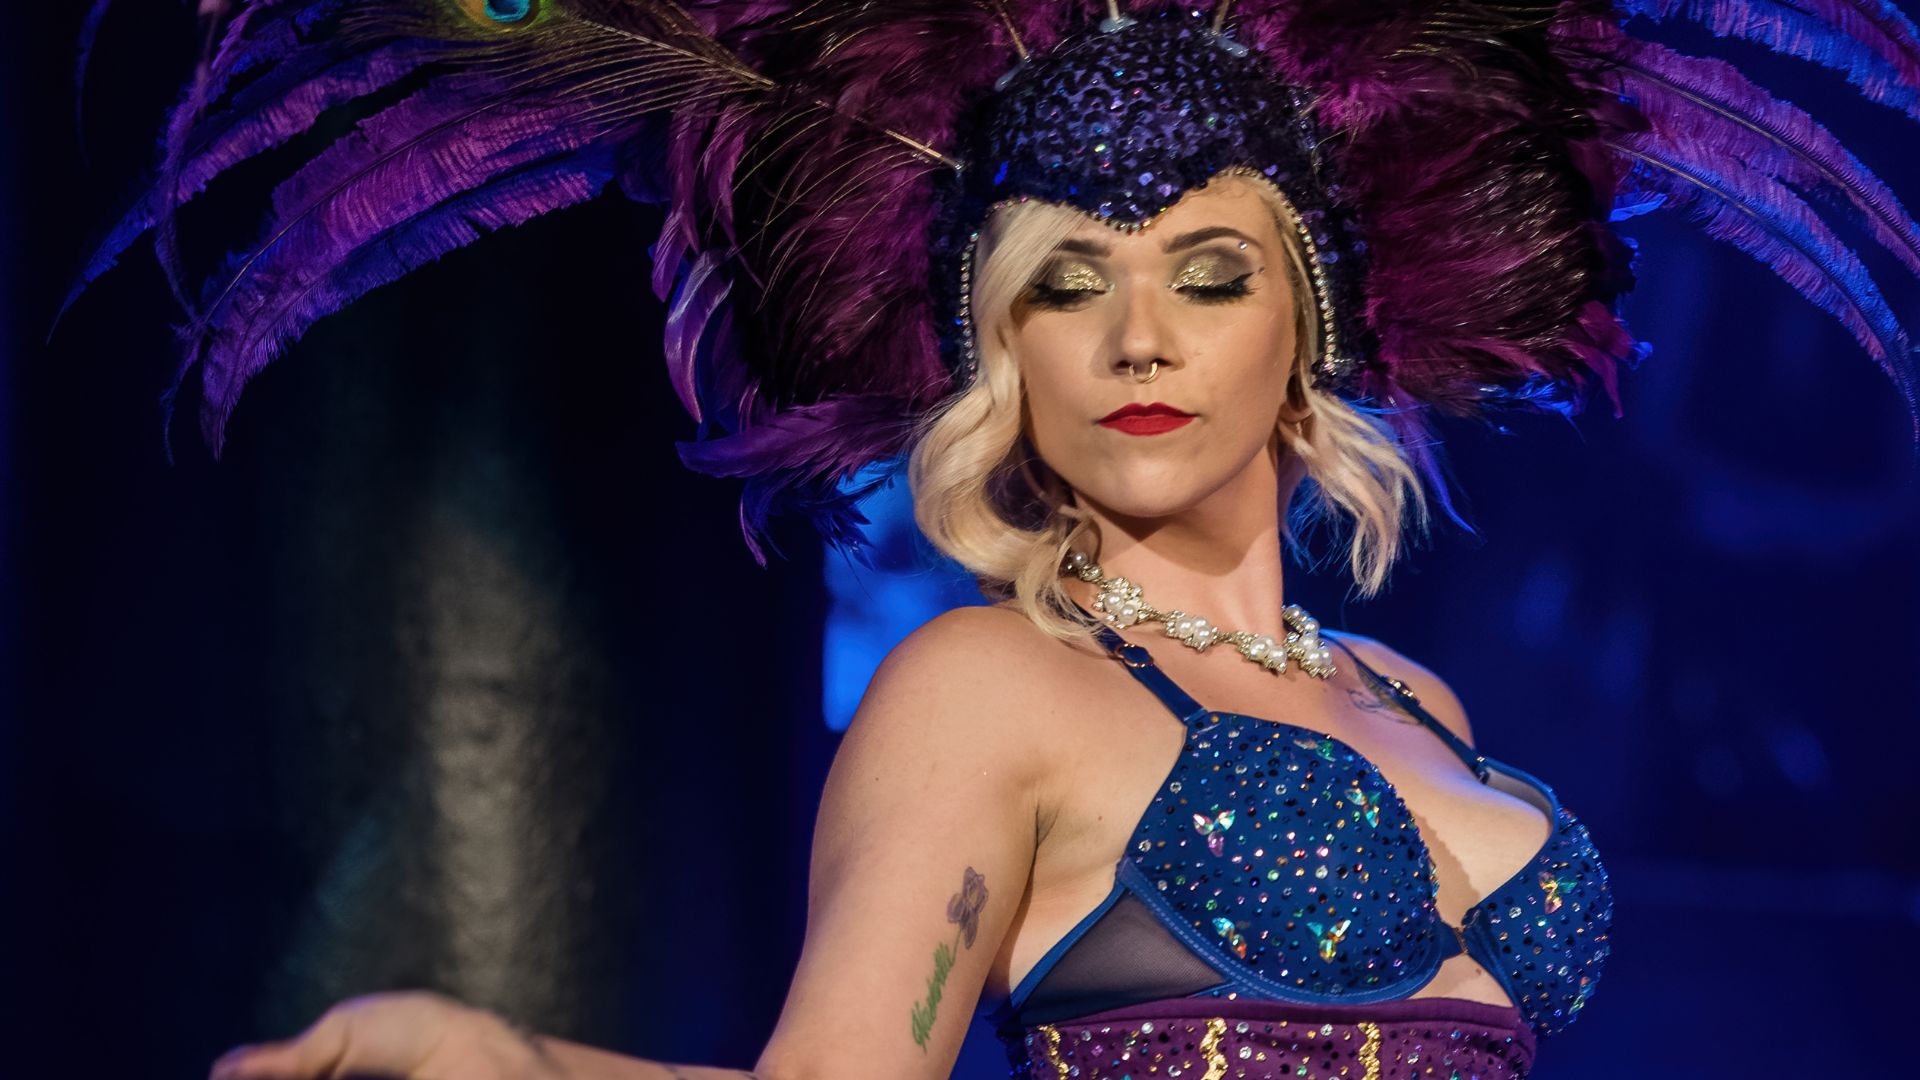 A woman in a purple feather headdress performs at The Boom Boom Room.